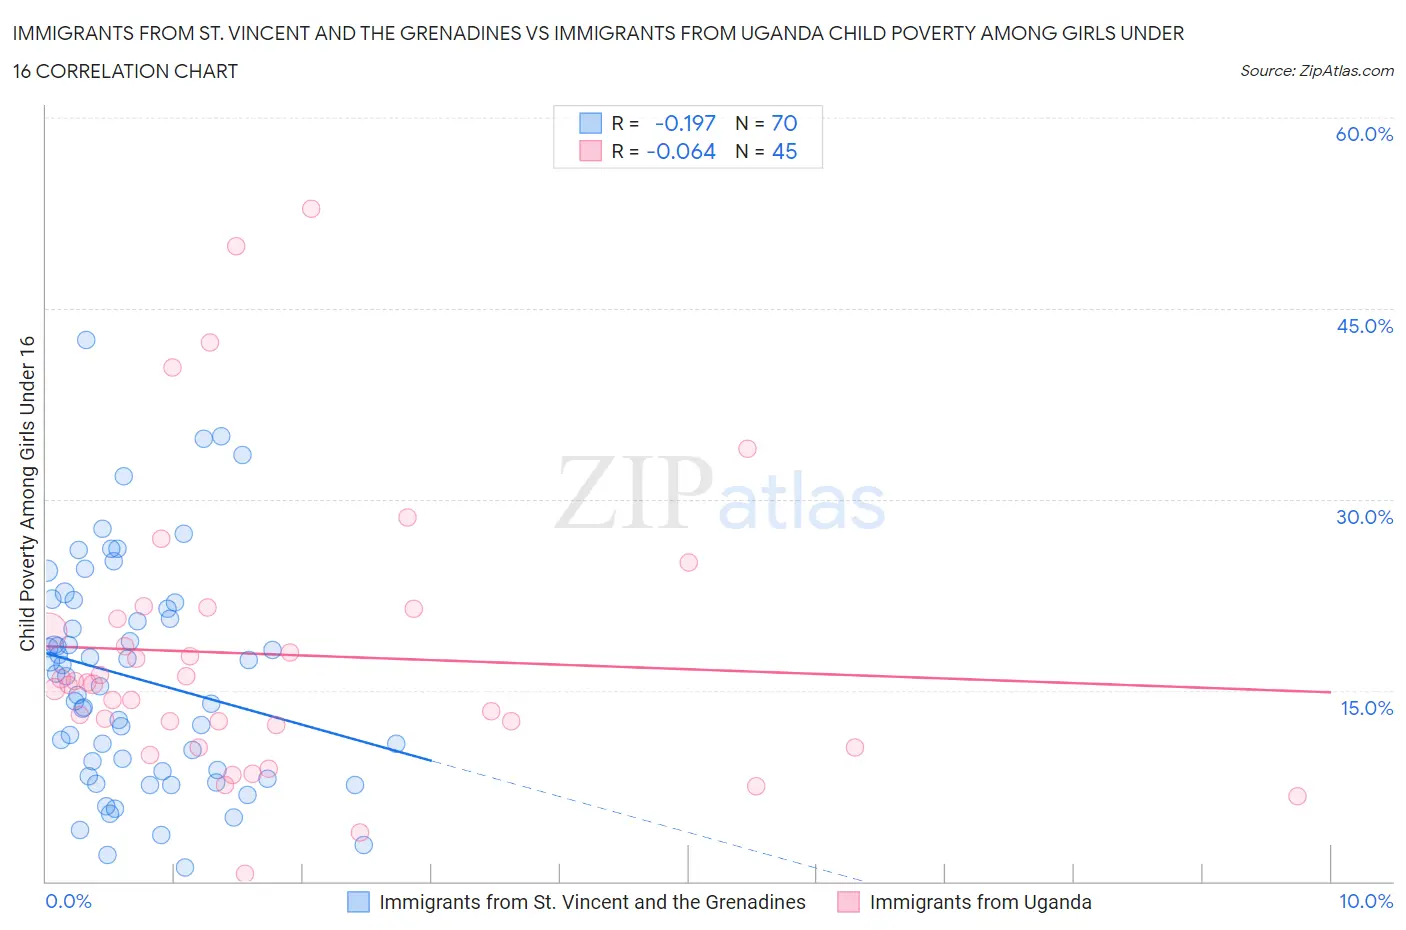 Immigrants from St. Vincent and the Grenadines vs Immigrants from Uganda Child Poverty Among Girls Under 16